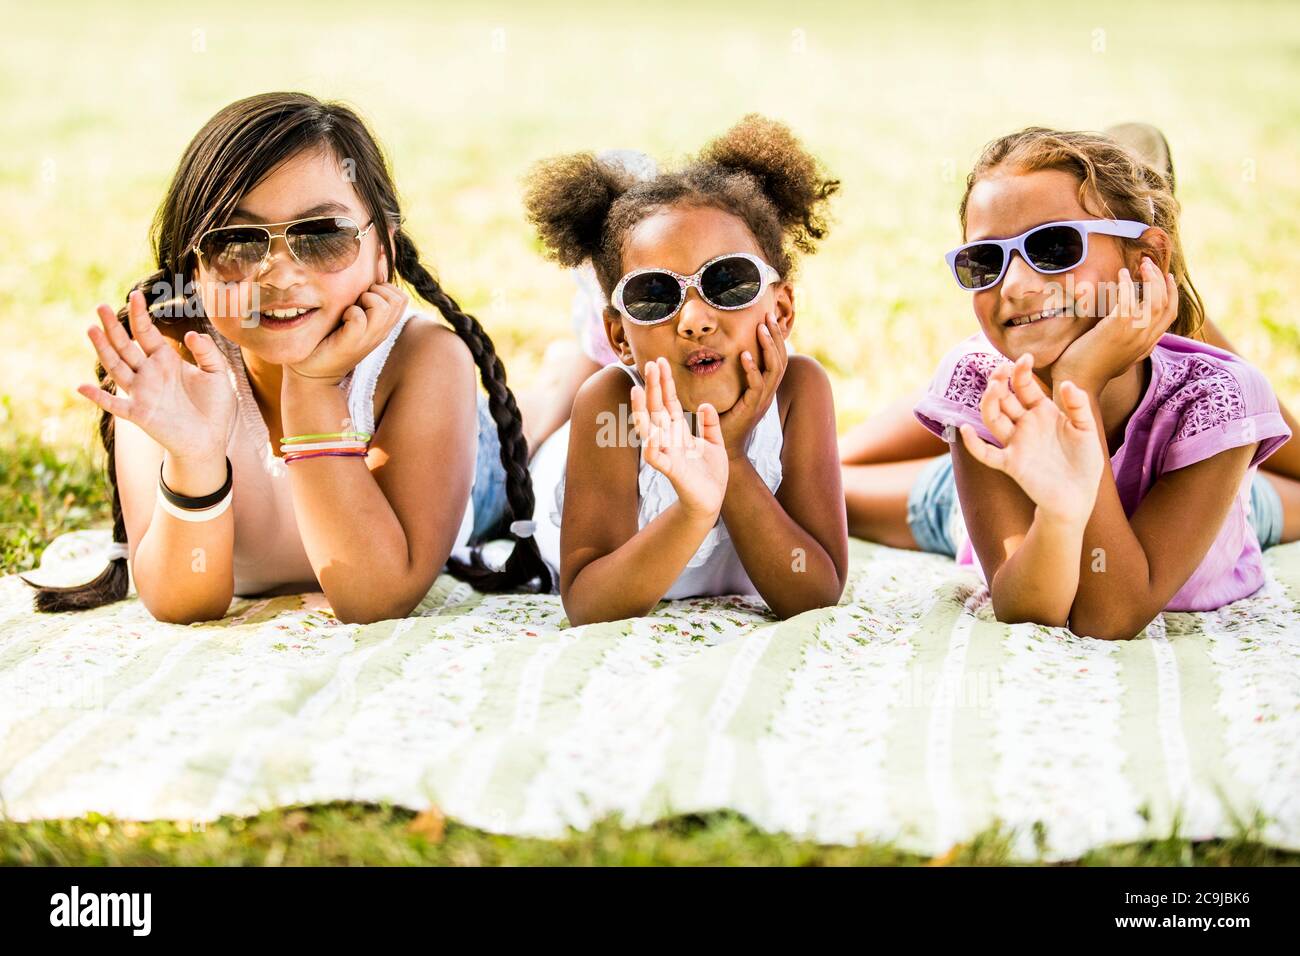 Girls wearing sunglasses and lying side by side on blanket in park, smiling, portrait. Stock Photo